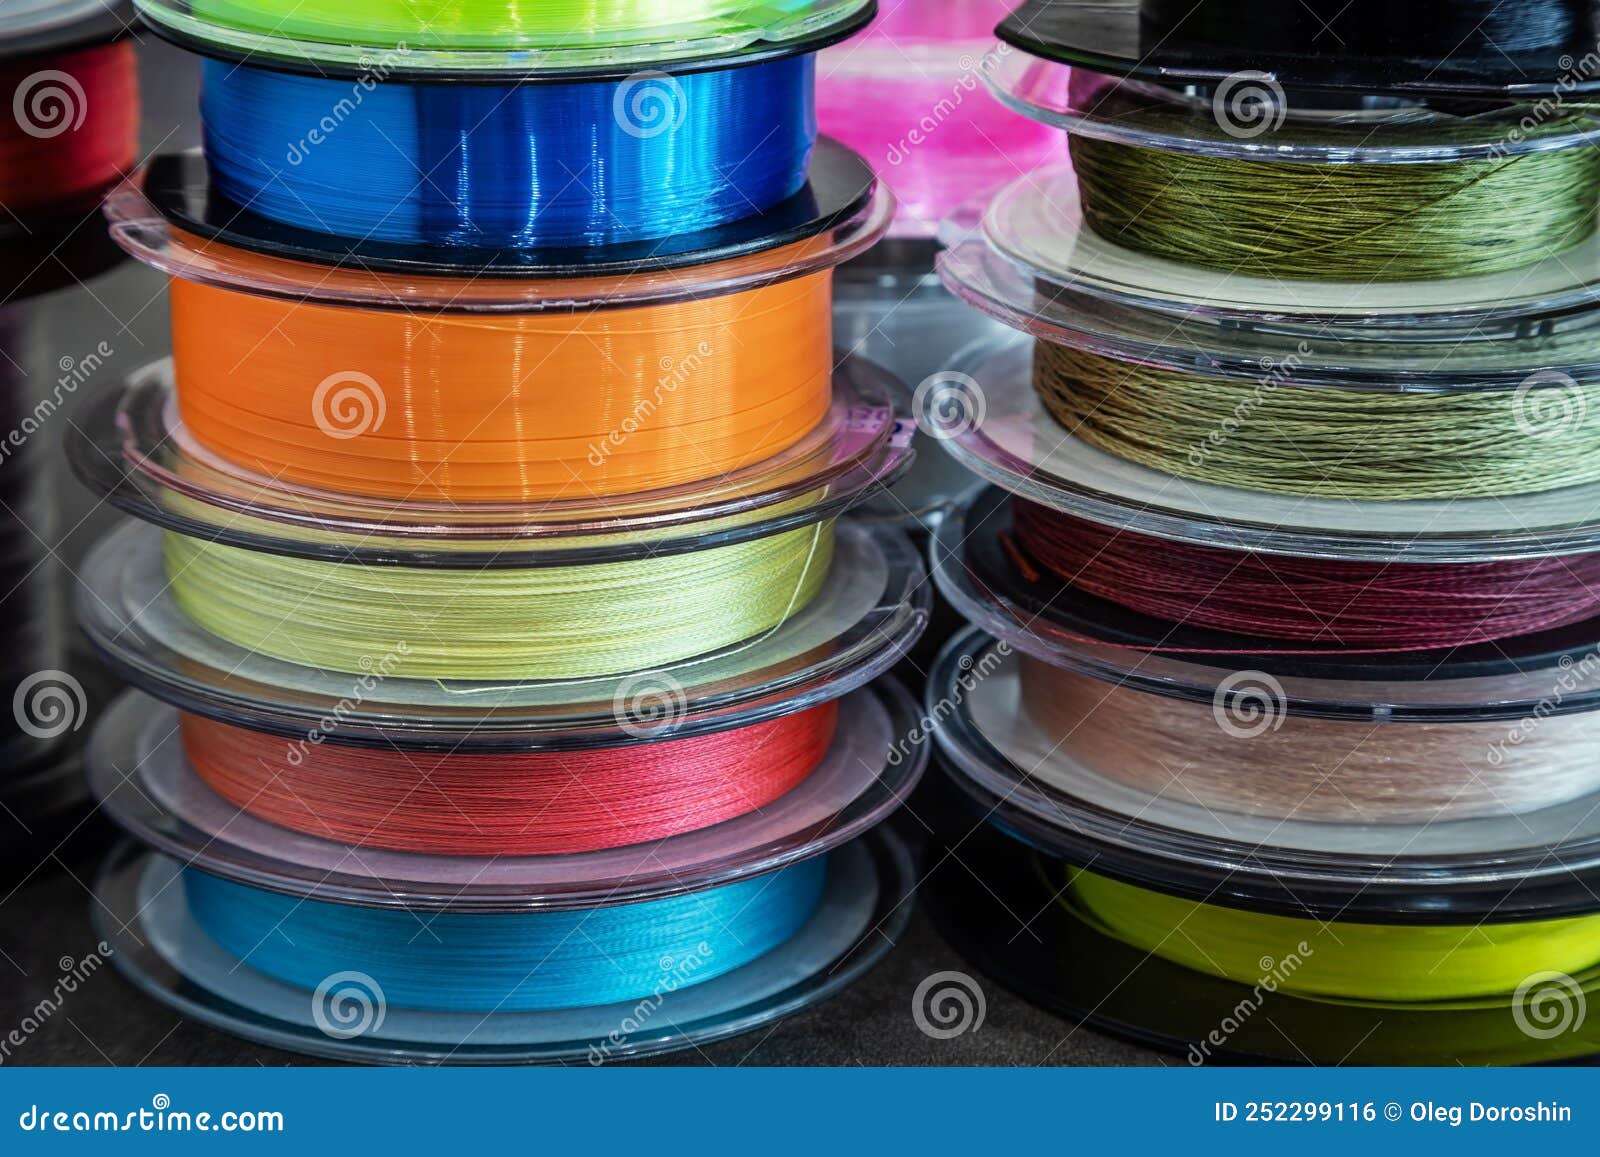 Different Types of Fishing Lines and Braided Cords in Fishing Reels Stock  Photo - Image of fishing, string: 252299116